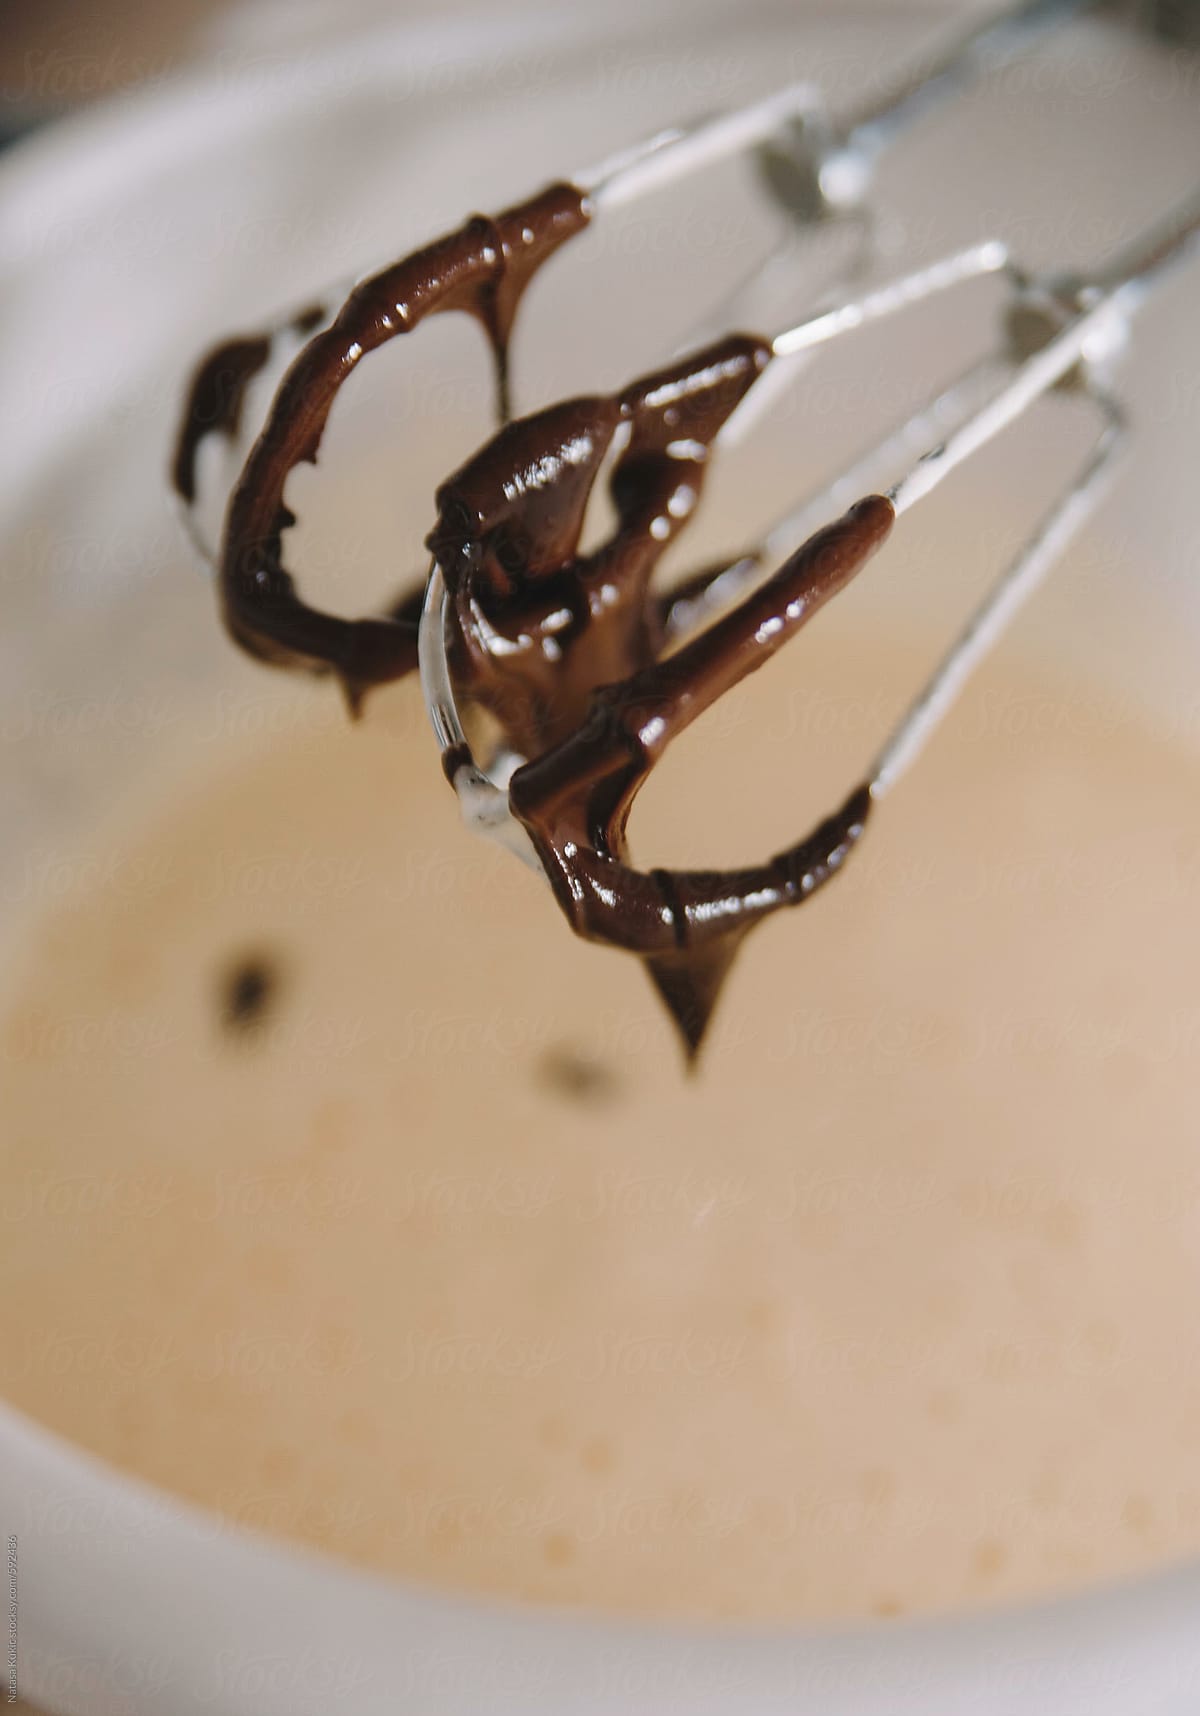 Melted chocolate peaks on a food mixer whisks